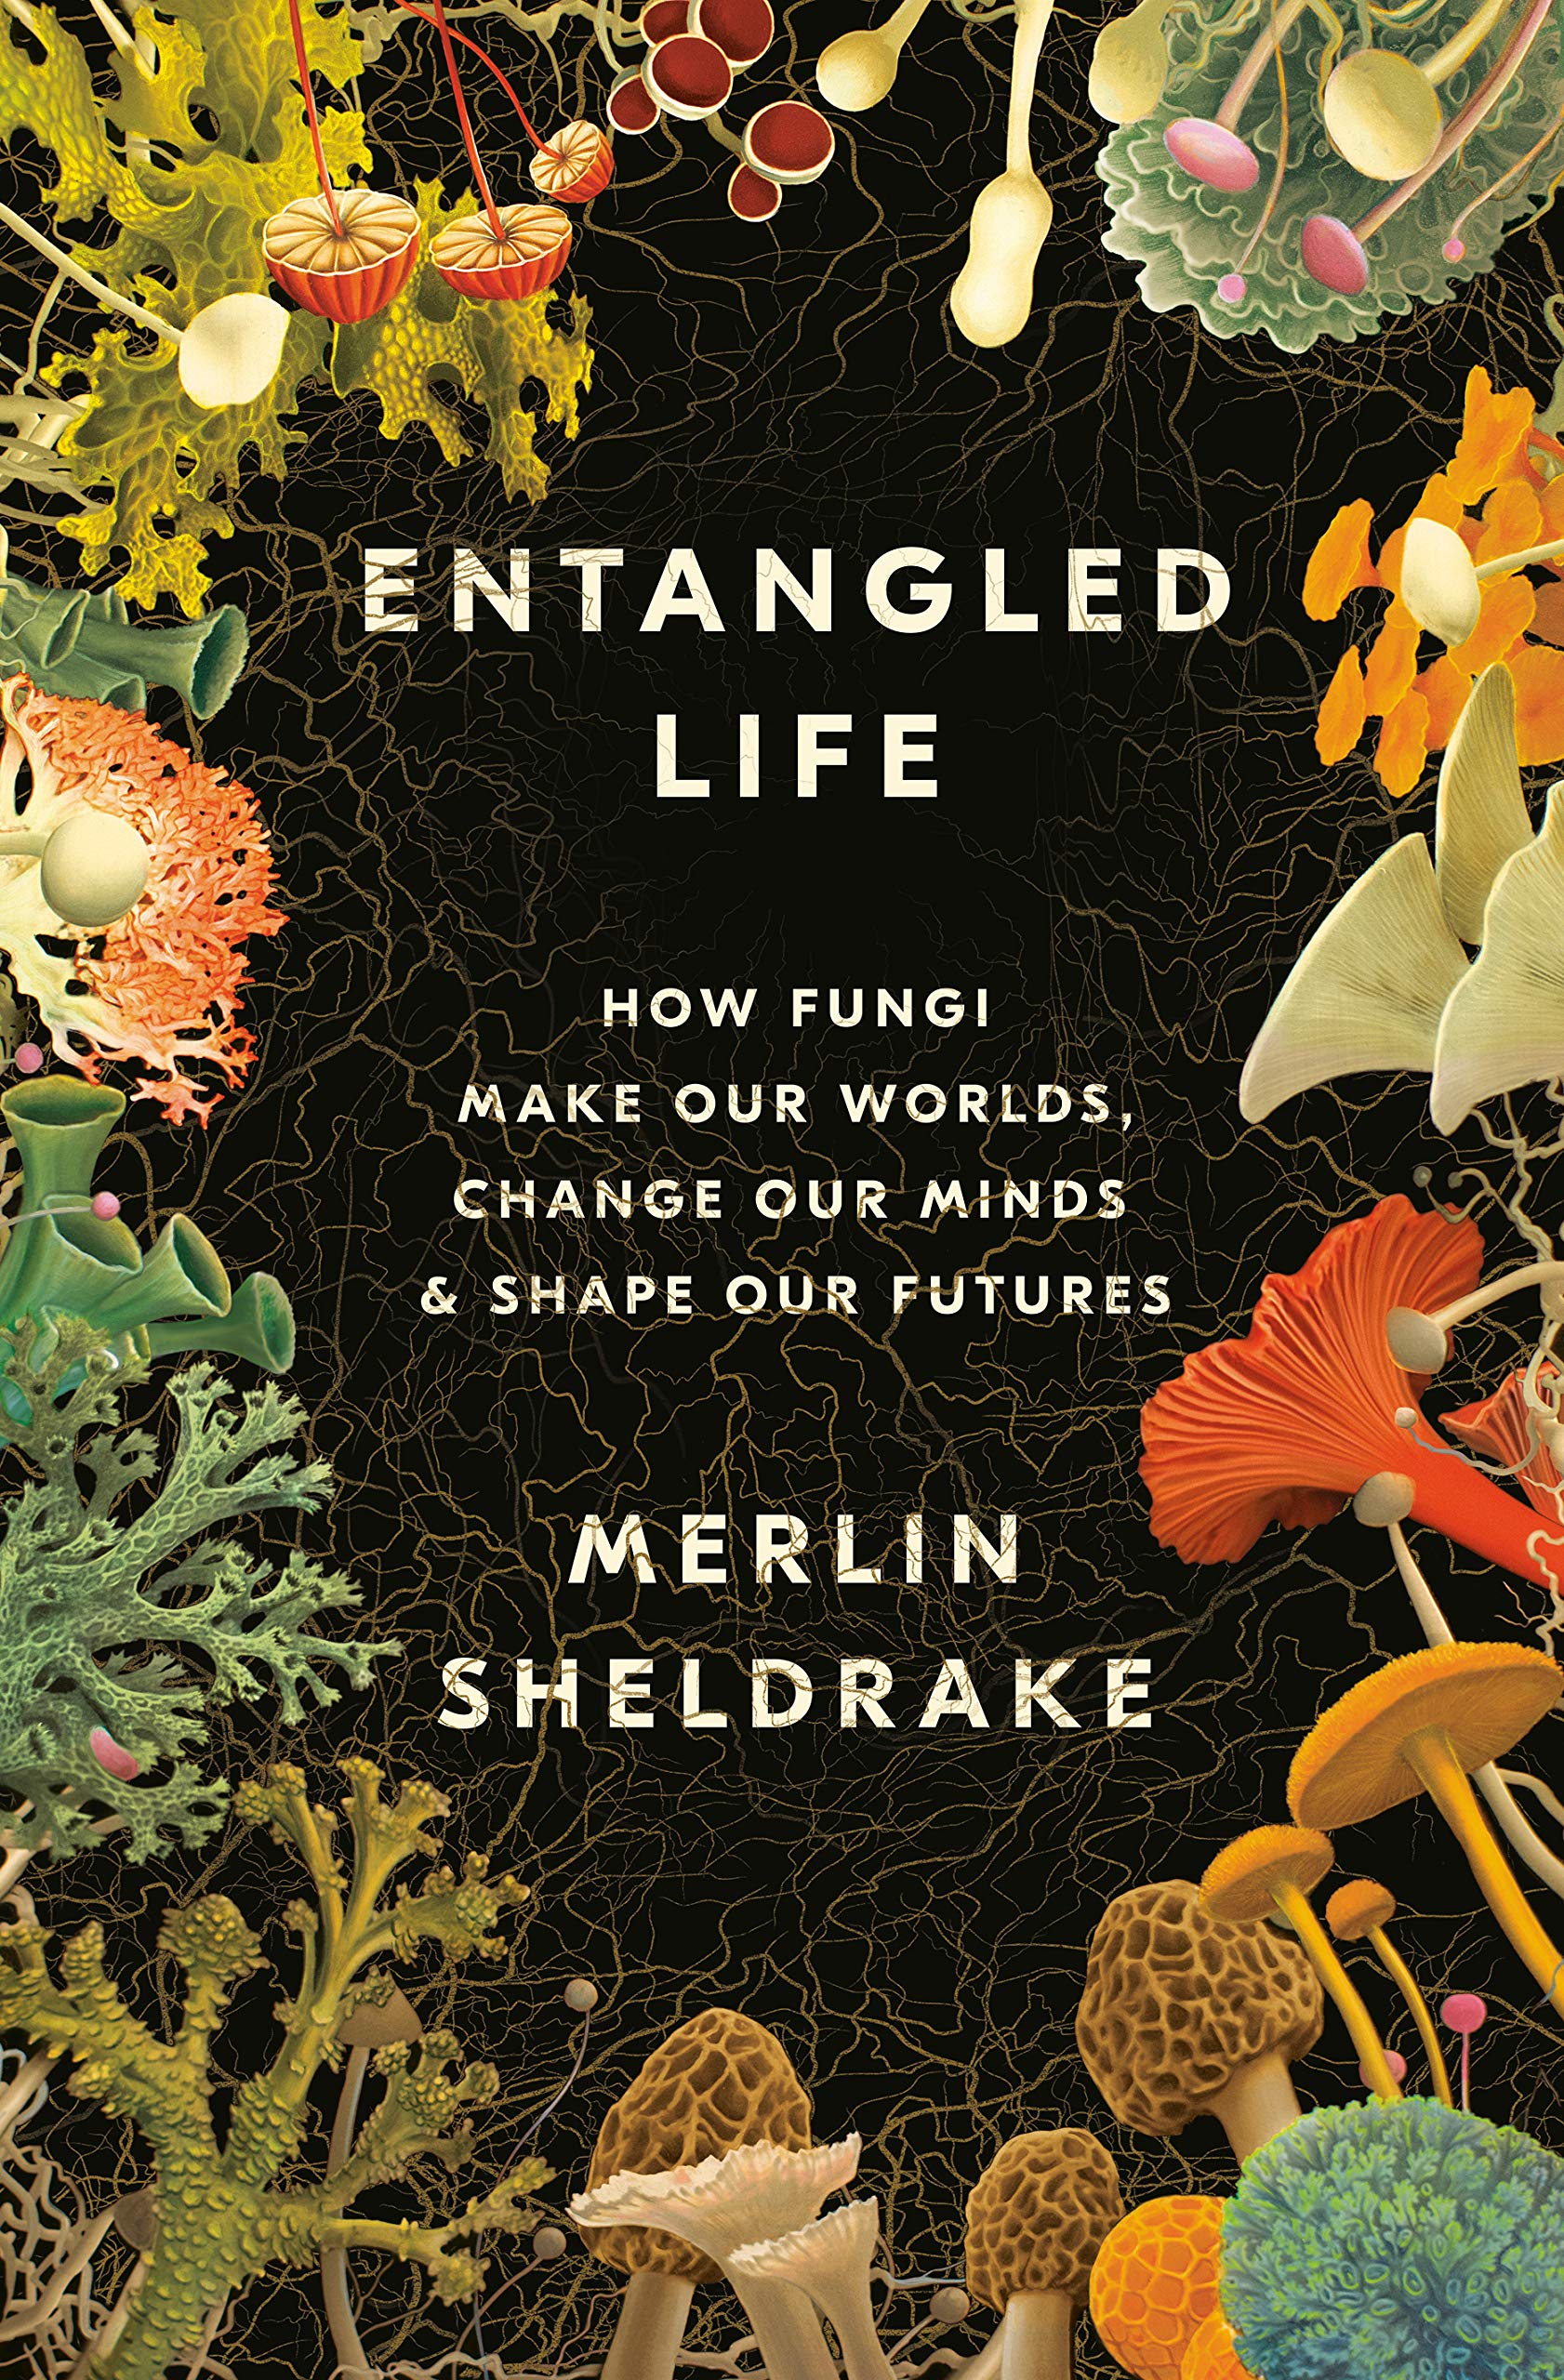 Entangled Life: How Fungi Make Our Worlds, Change Our Minds & Shape Our Futures (2020)